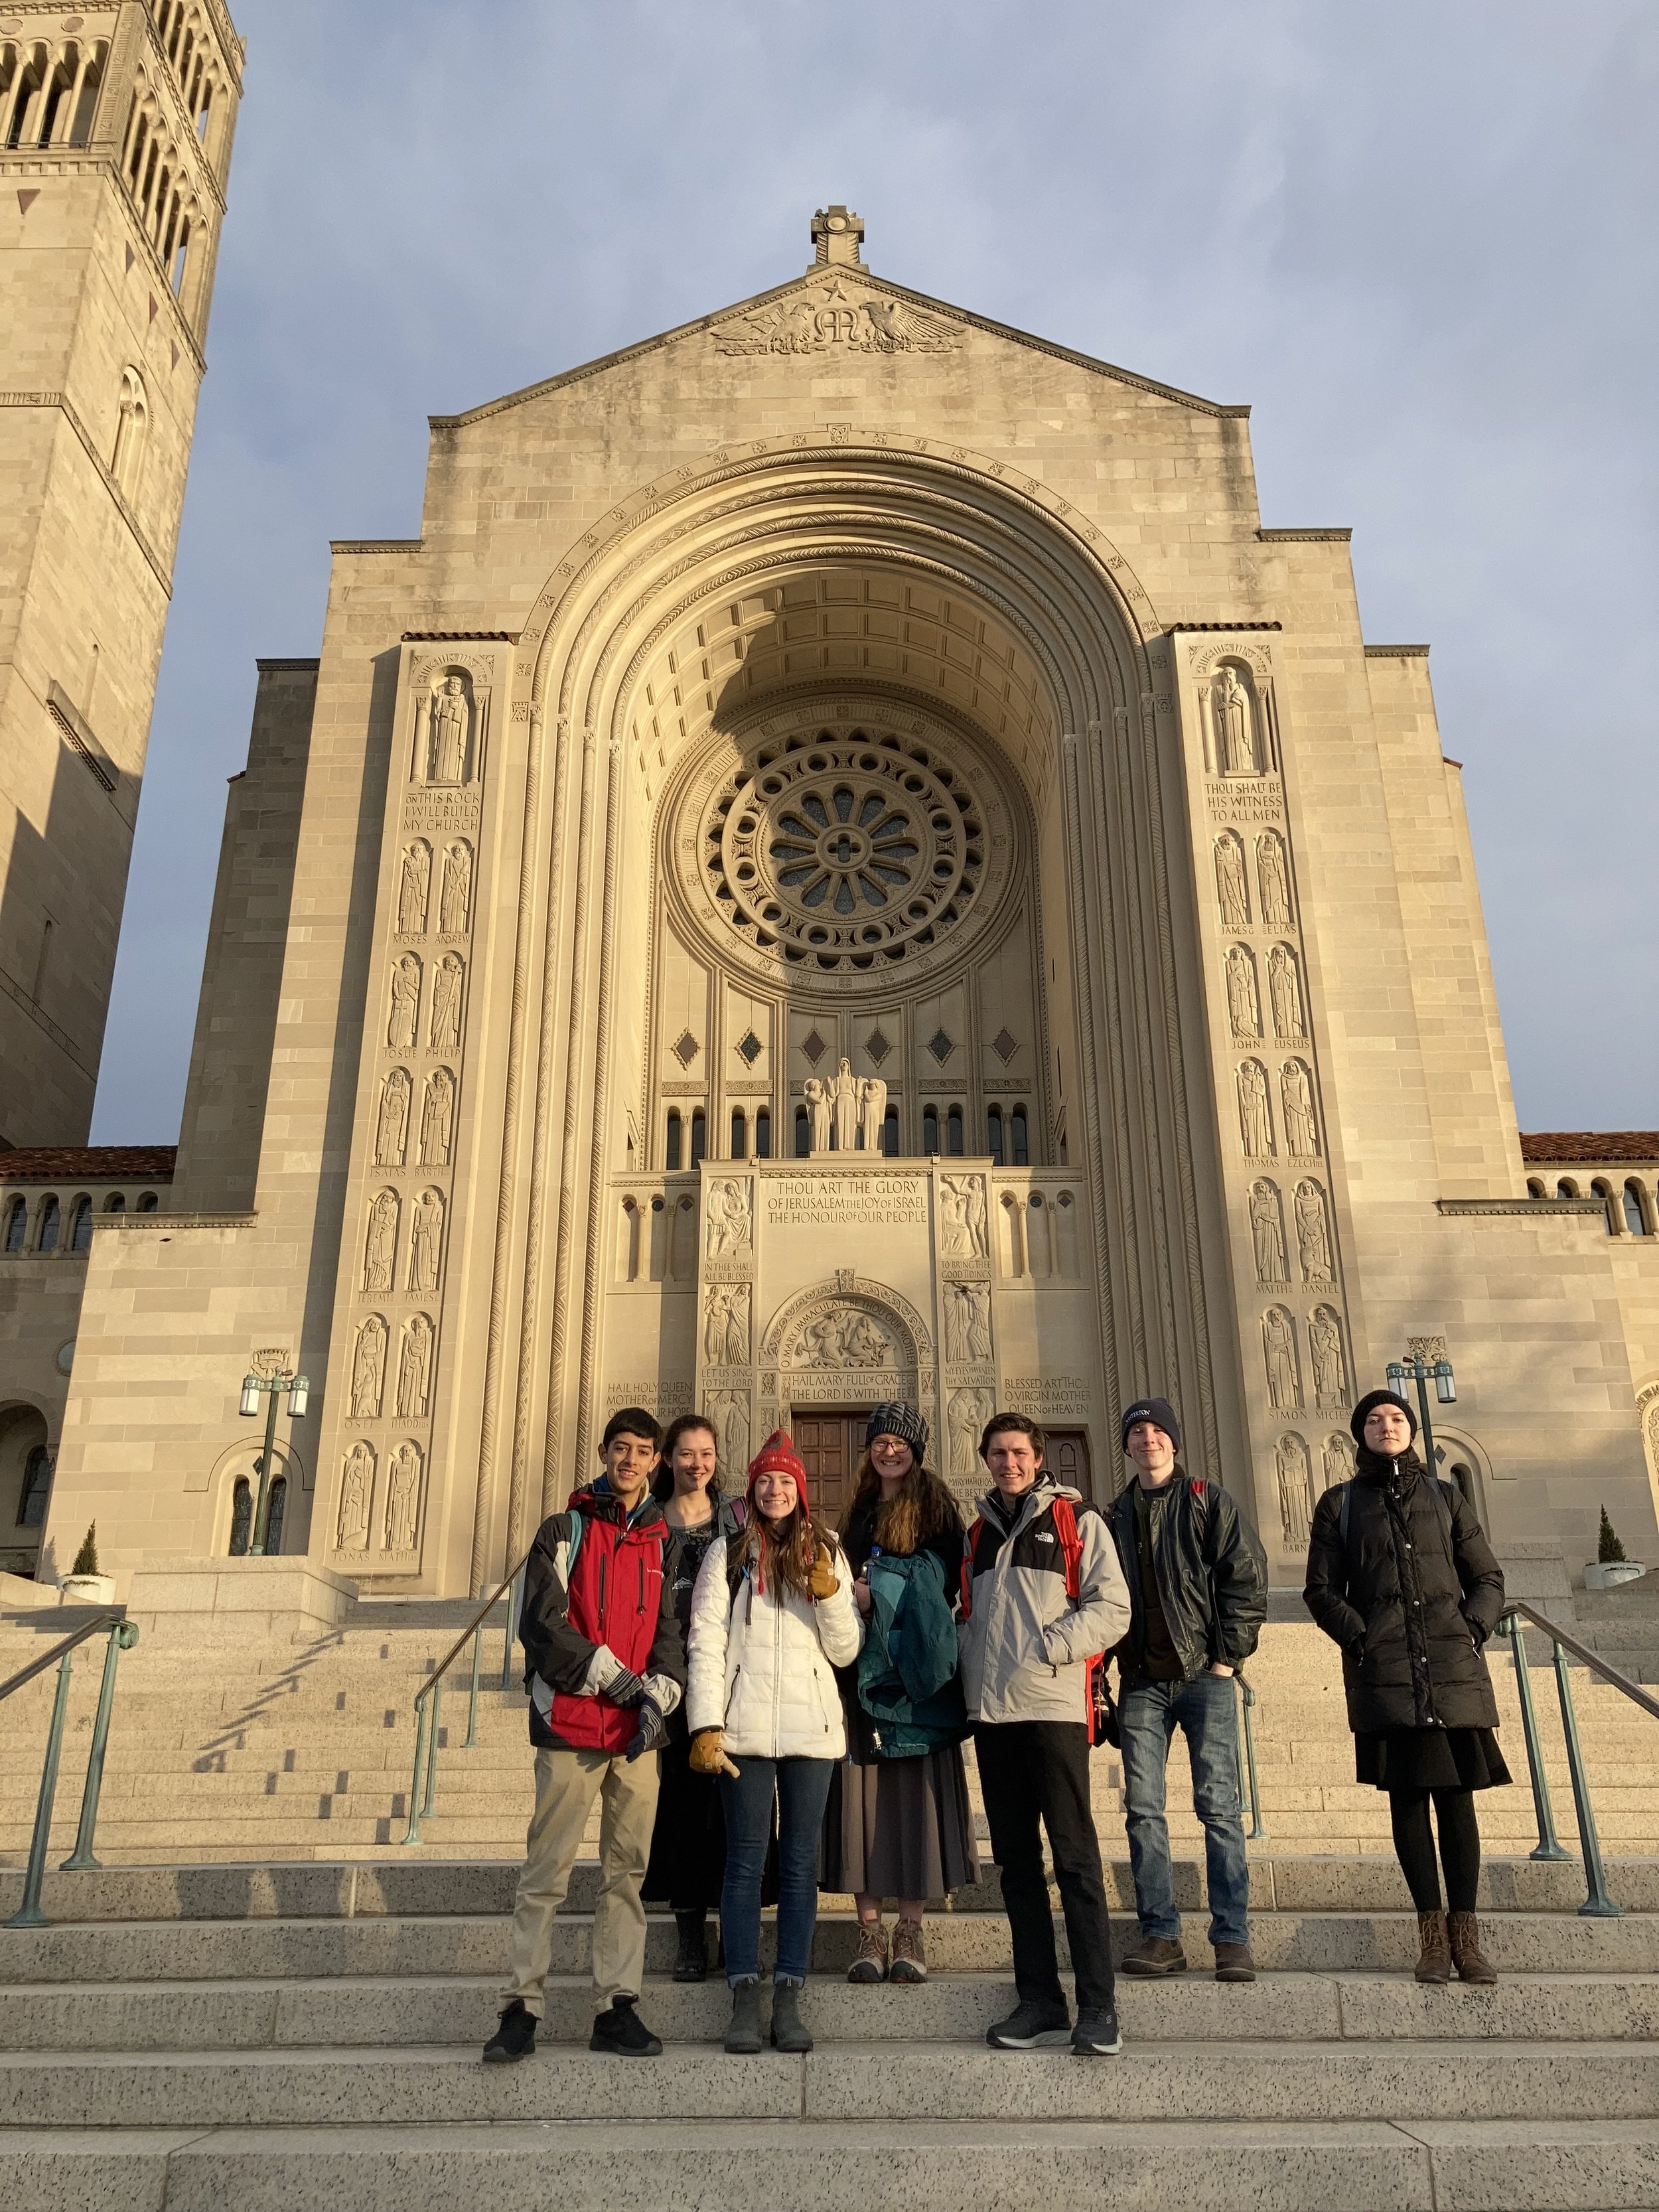 Sunday Mass at the National Shrine of the Basilica of the Immaculate Conception